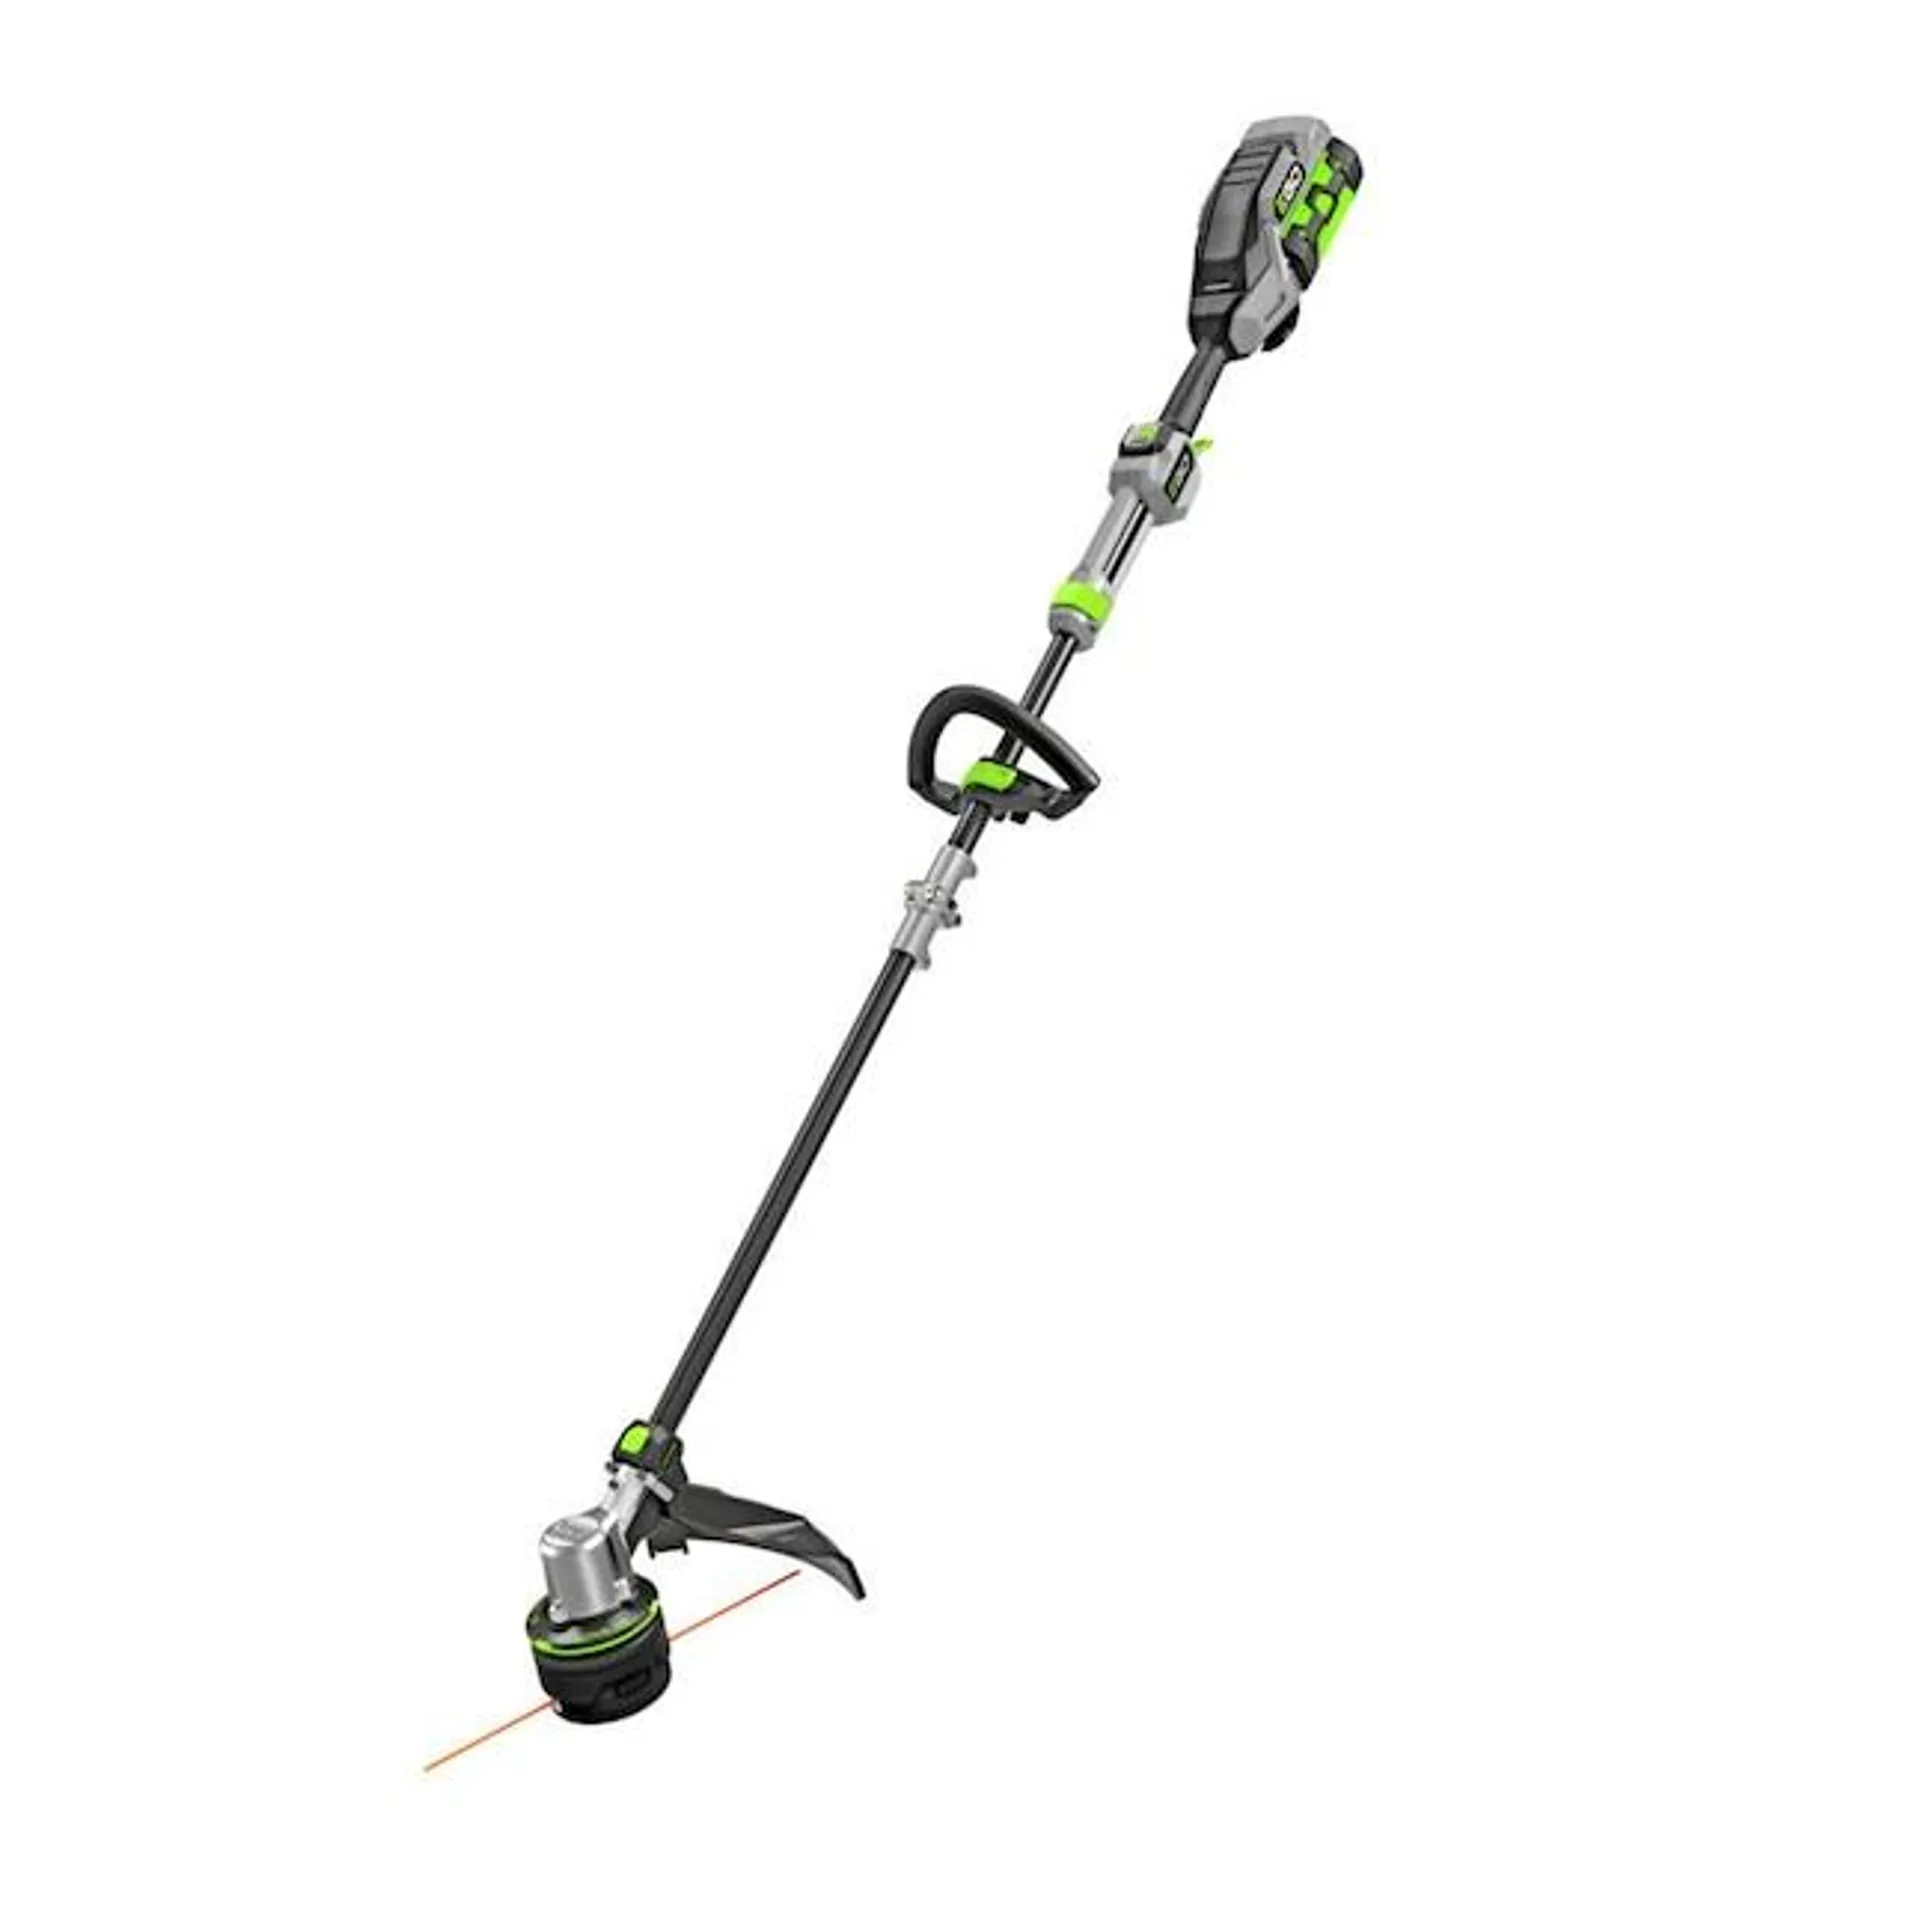 EGO POWER + POWERLOAD with LINE IQ 56-volt 16-in Telescopic Shaft Battery String Trimmer 4 Ah (Battery and Charger Included)